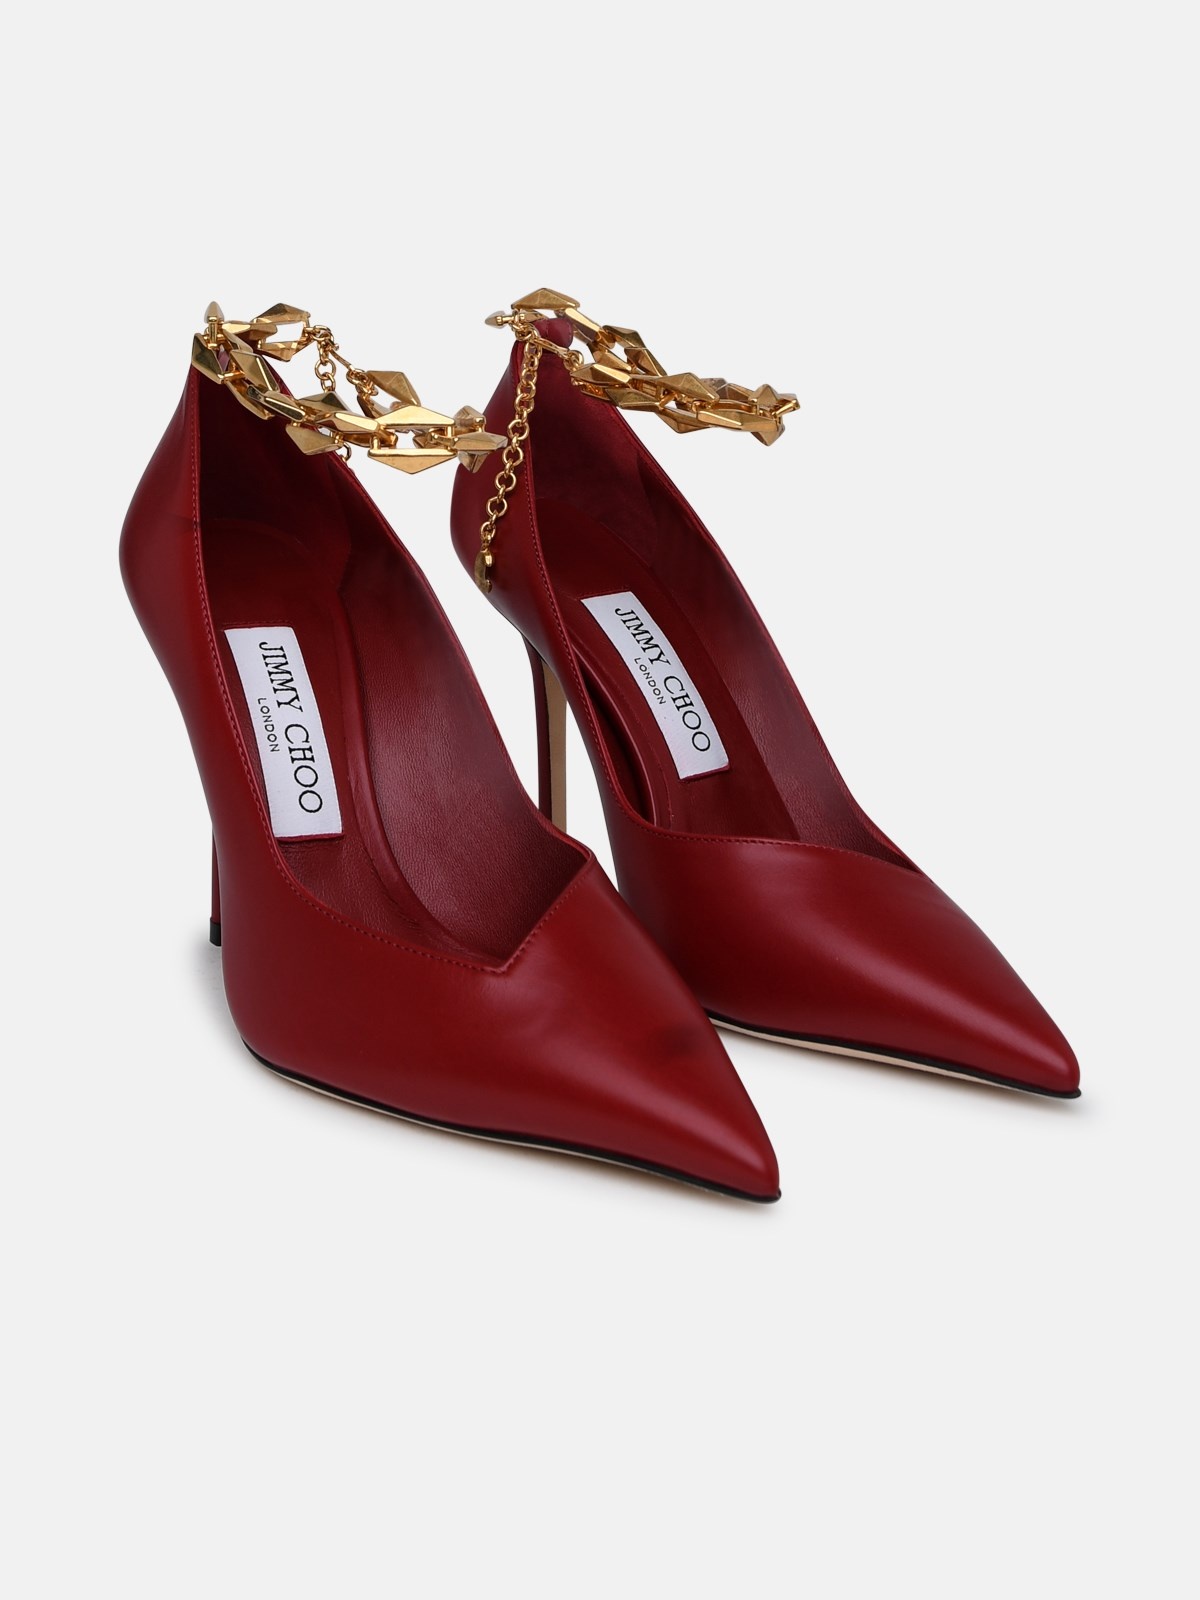 Diamond pumps in red leather - 2